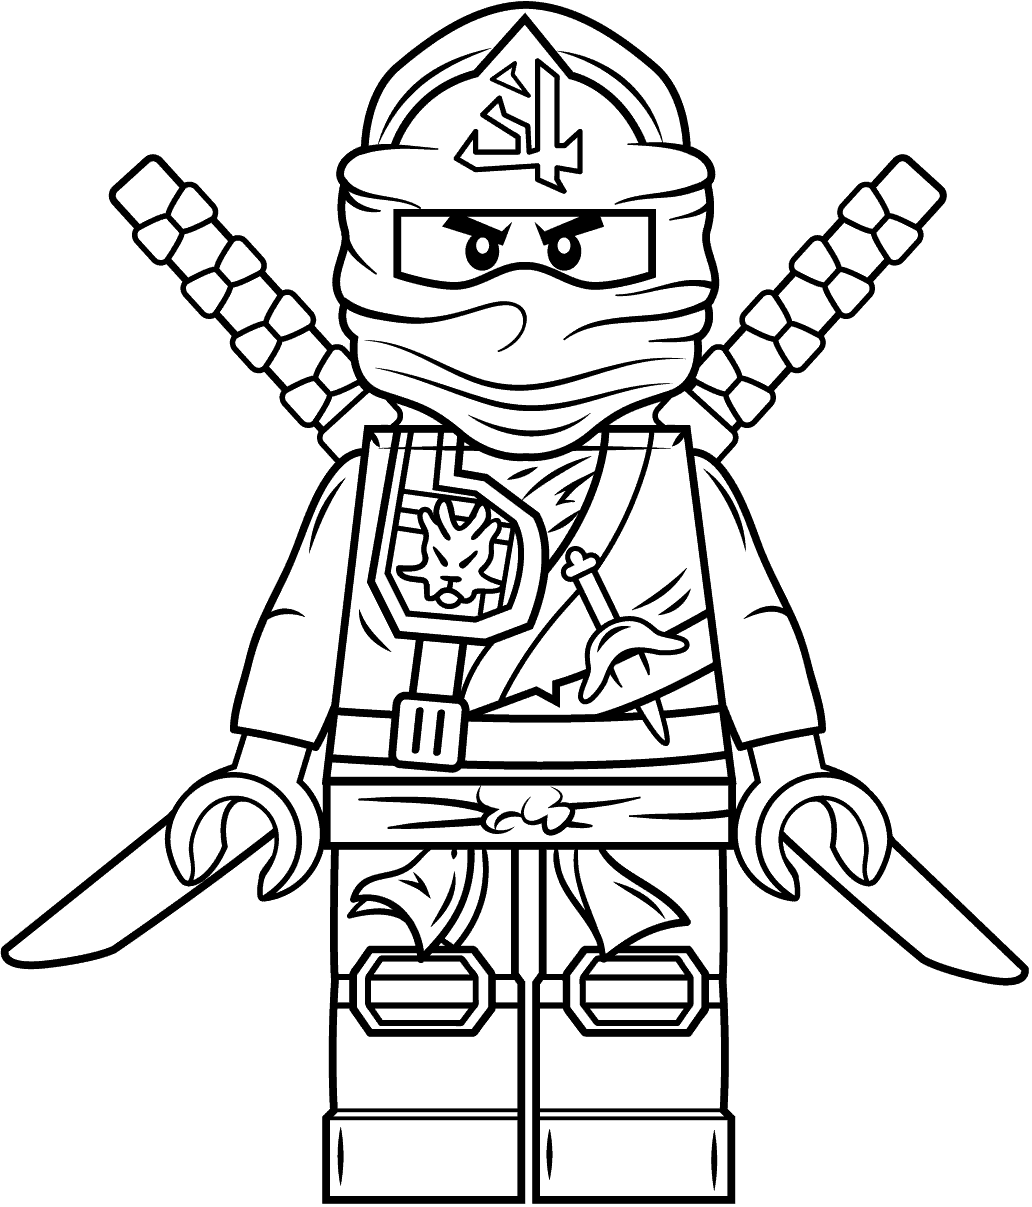 Mania Ende Takt Lego Ninjago Coloring Pages - Free Printable Coloring Pages for Kids